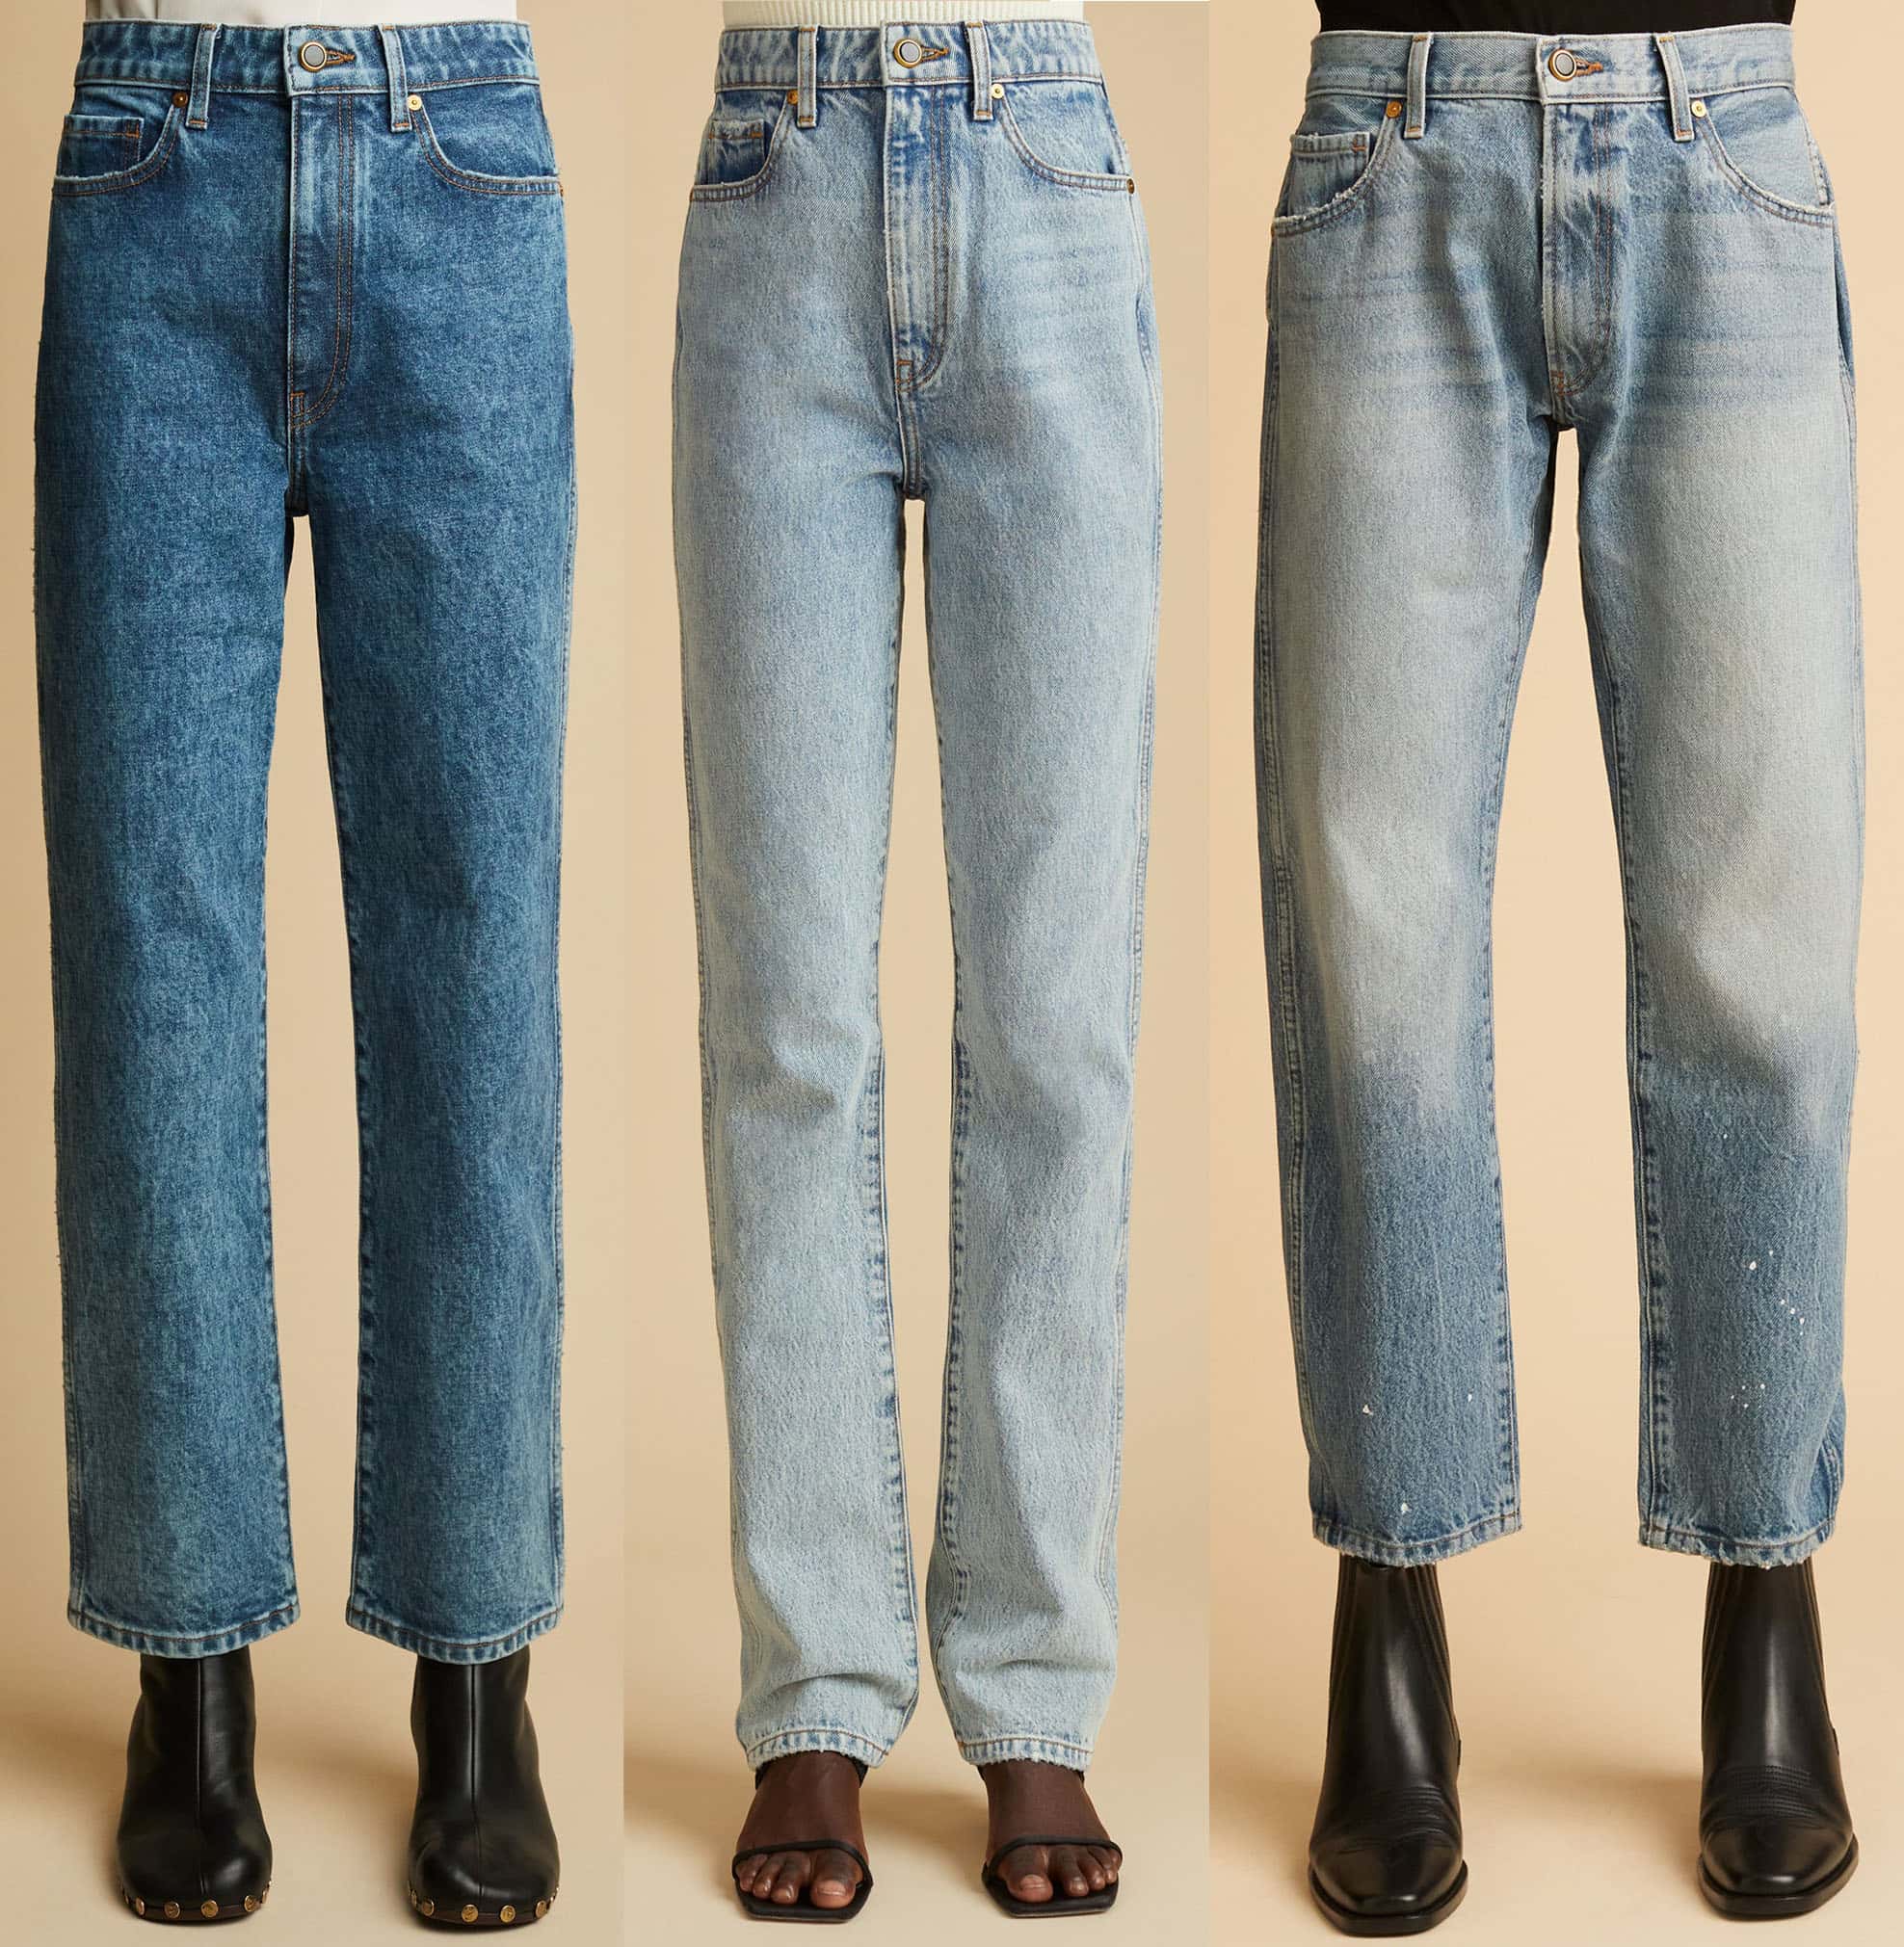 Abigail Stretch Jeans in Lakeland, $420; The Darla Jeans in Santa Fe, $380; The Kyle Jeans in Janesville, $440